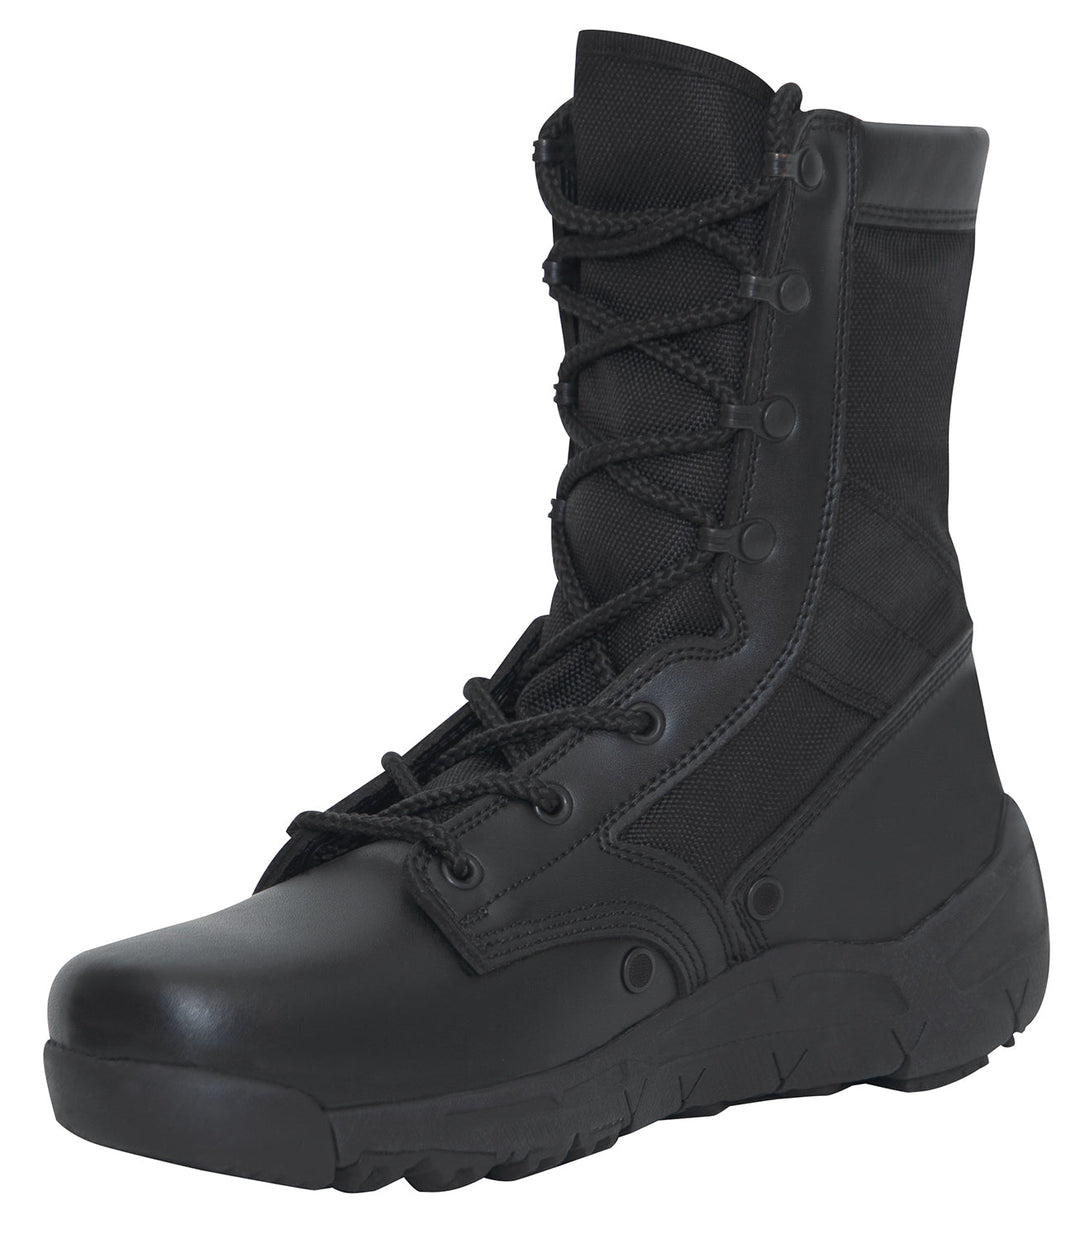 V-Max Lightweight Tactical Boot - 8 Inch by Rothco (Black) Size 8 - Final Sale Ships Same Day